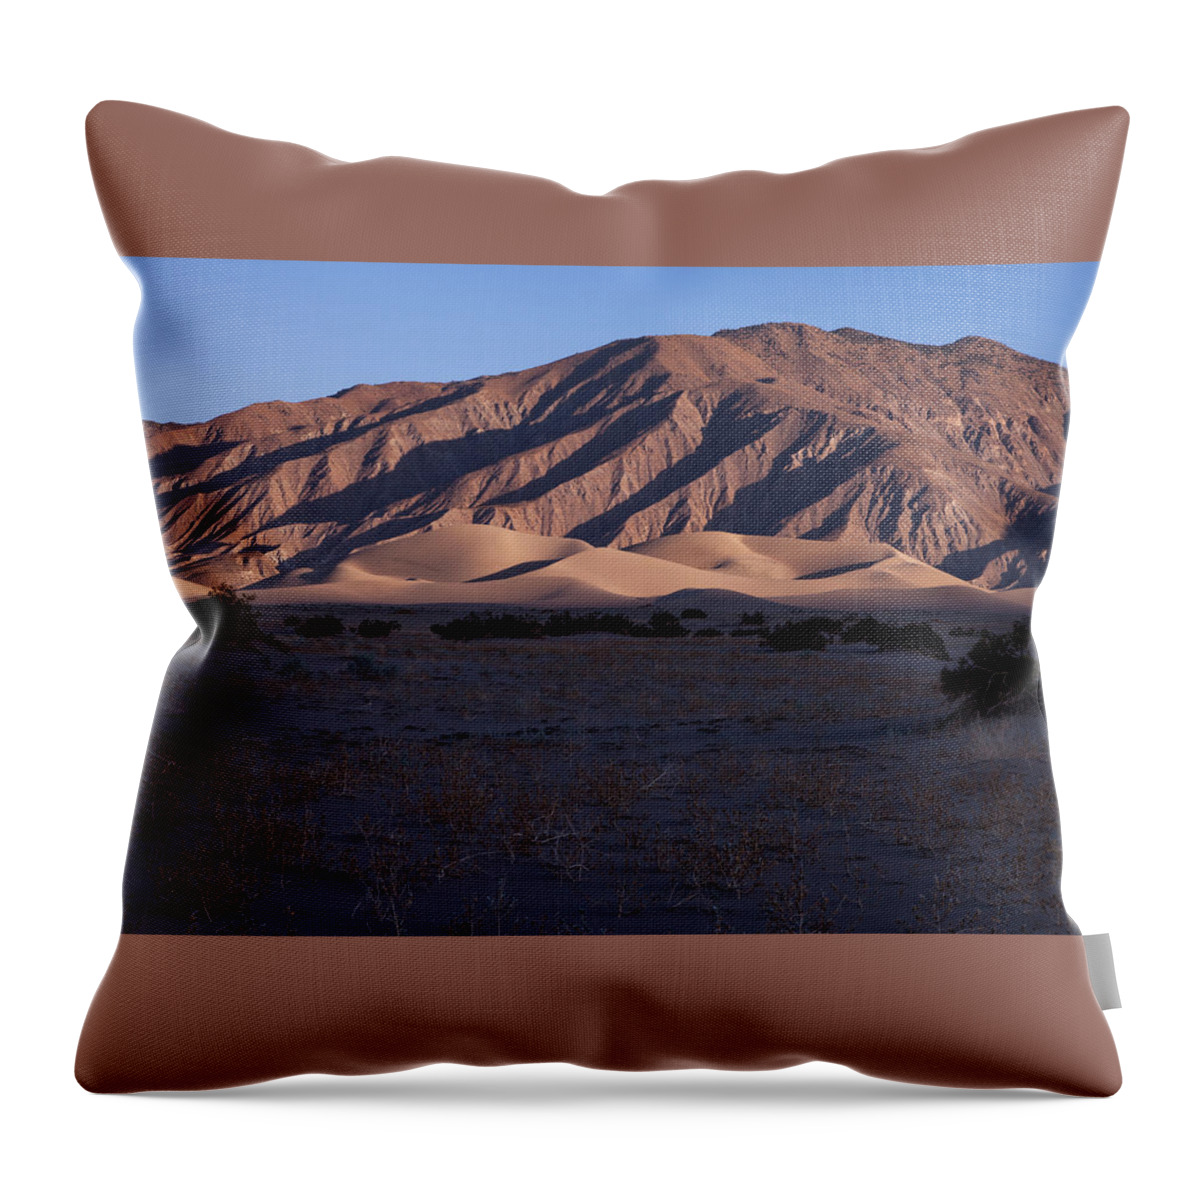 Panamint Dunes Throw Pillow featuring the photograph Panamint Dunes 1 by Rick Pisio